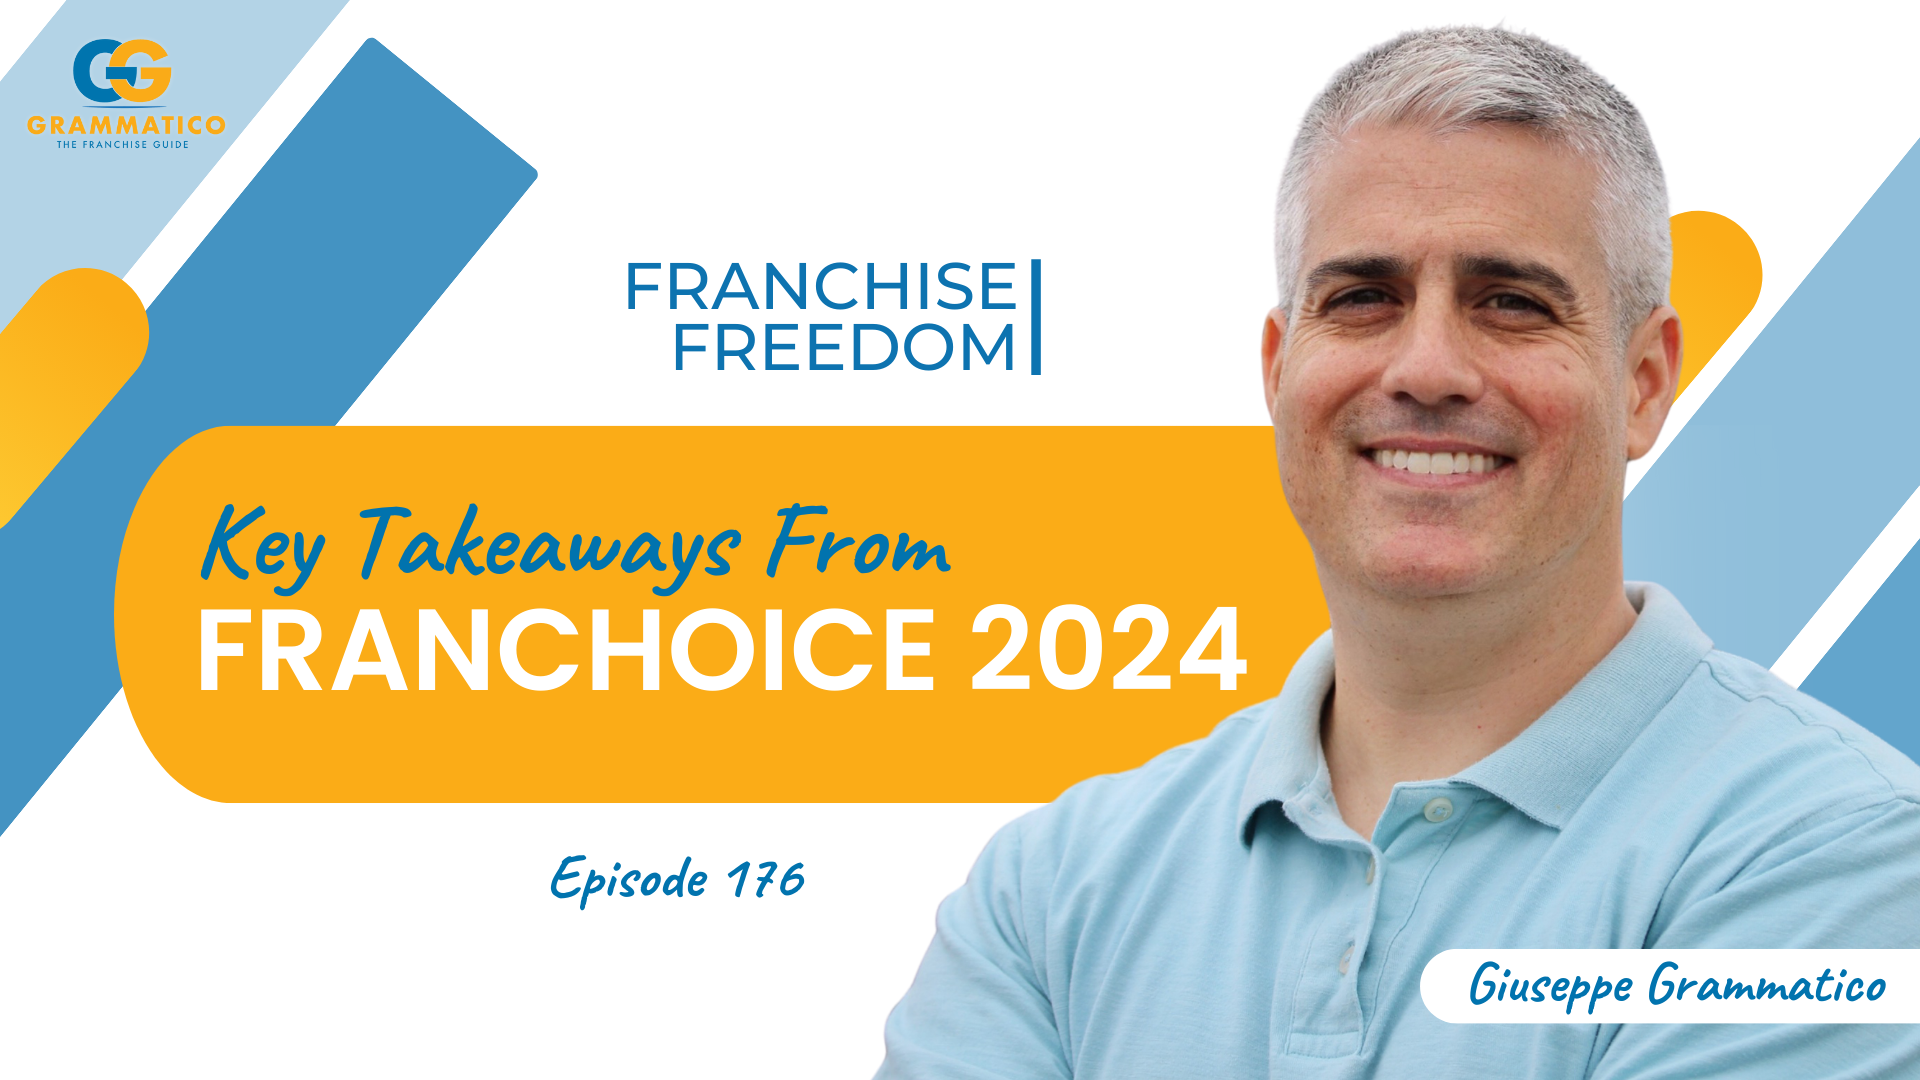 Funding, Feedback, and Fellowship: Key Takeaways from FranChoice 2024